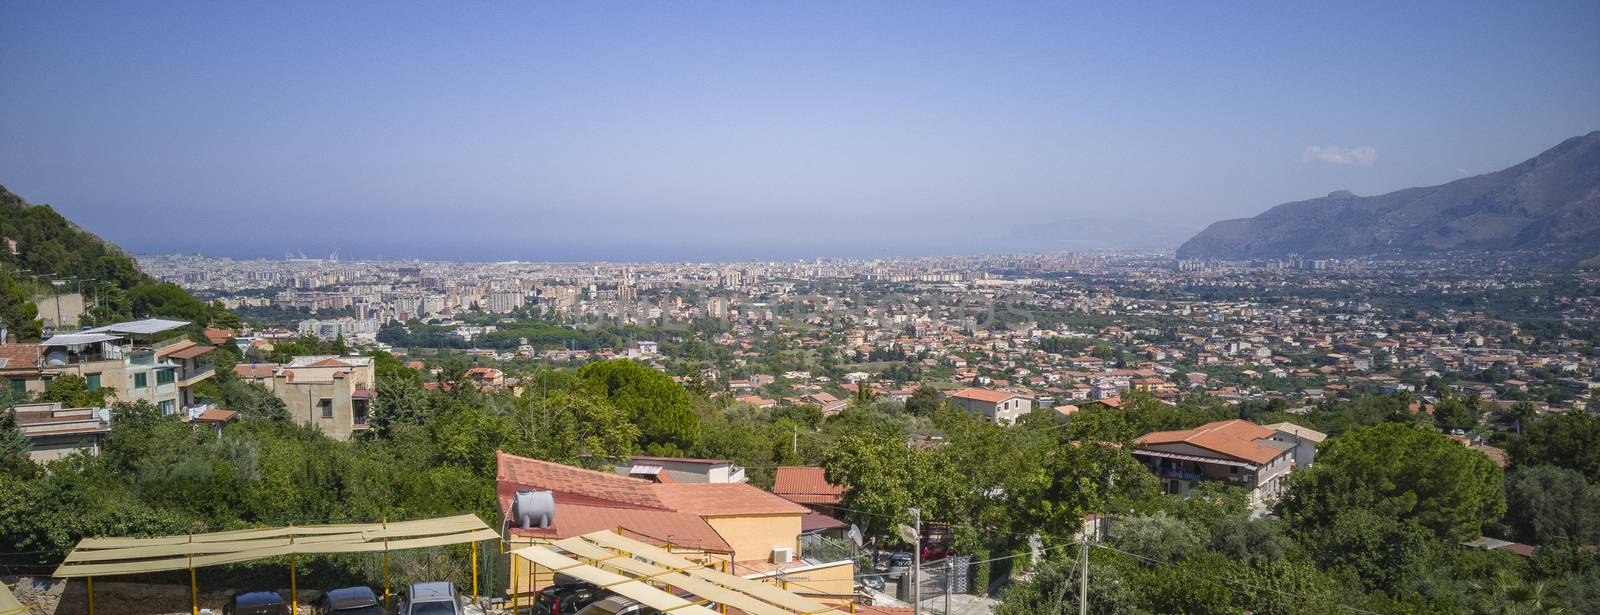 Panorama of the city of Palermo Shot from above